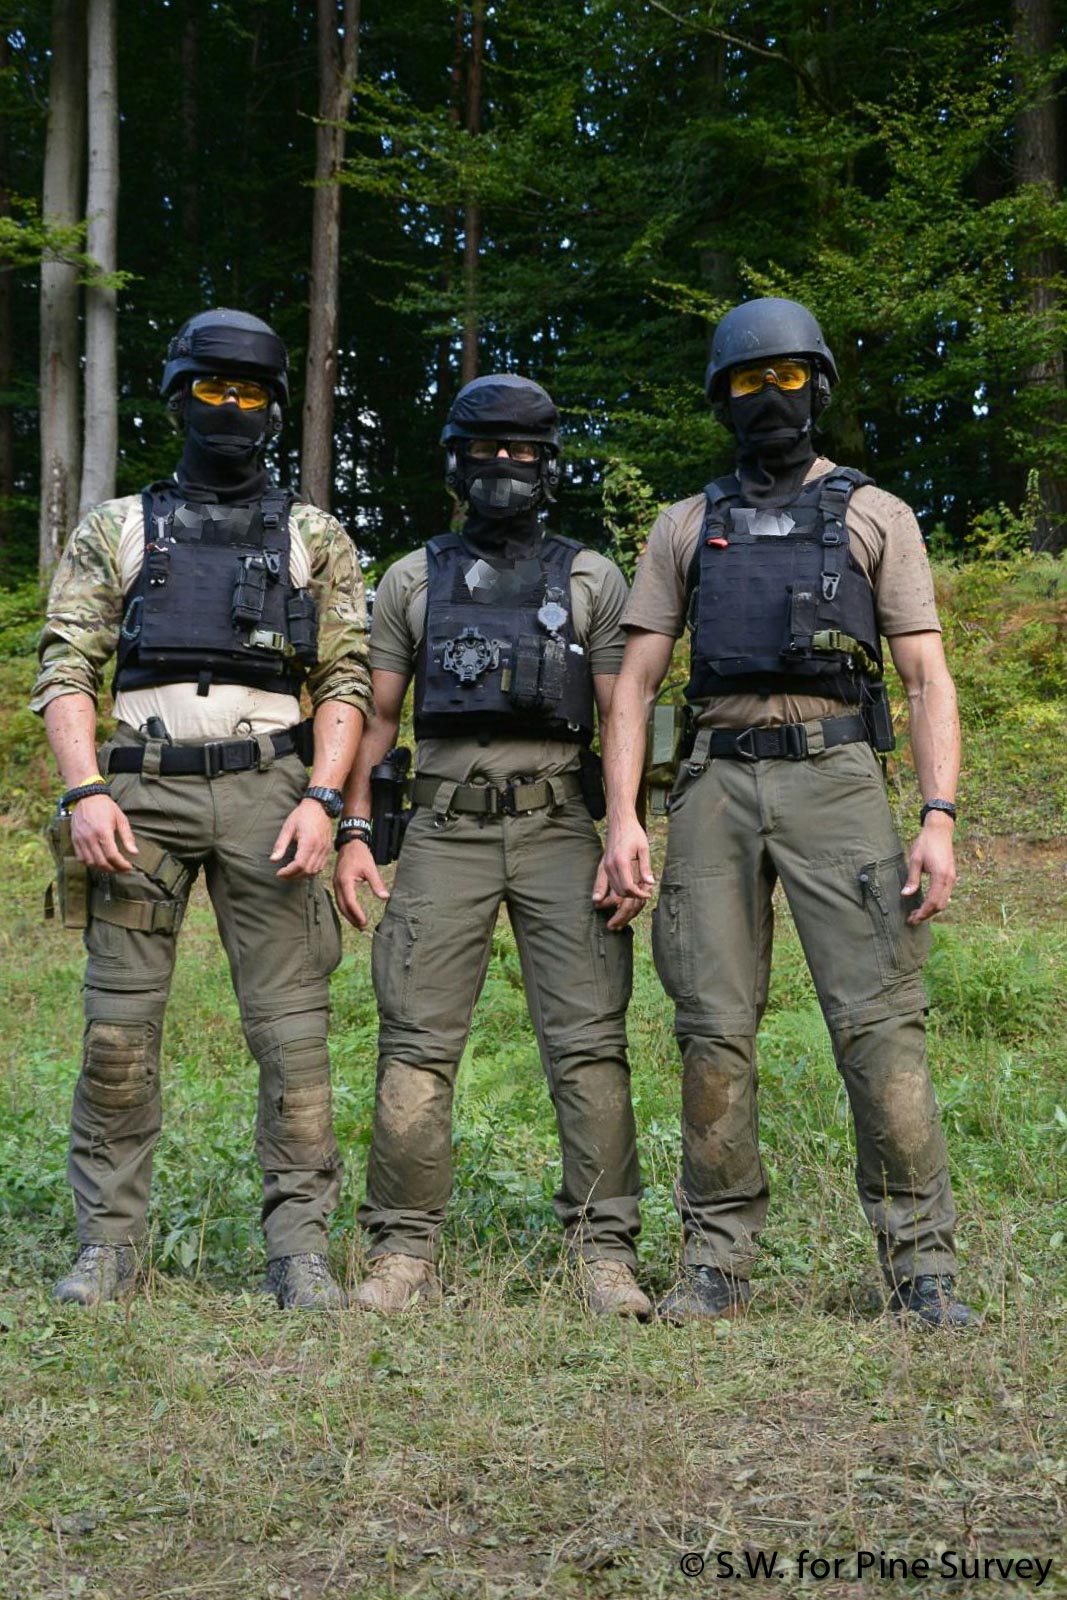 The TT Plate Carrier LC in use